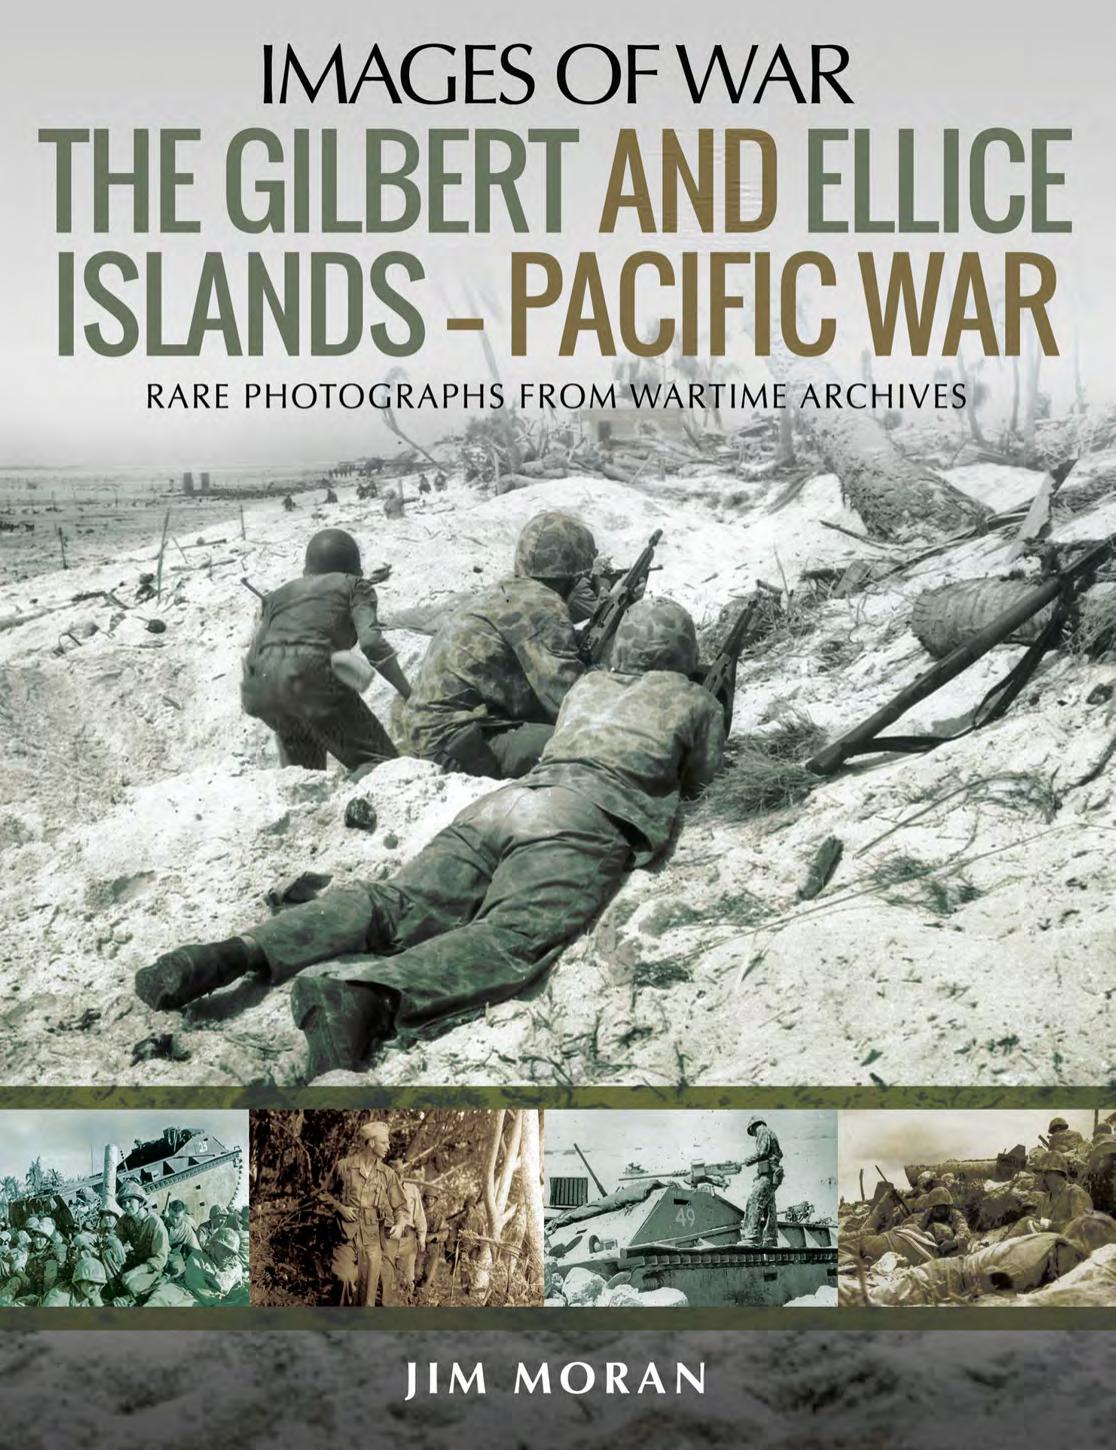 The Gilbert and Ellice Islands â Pacific War by Jim Moran